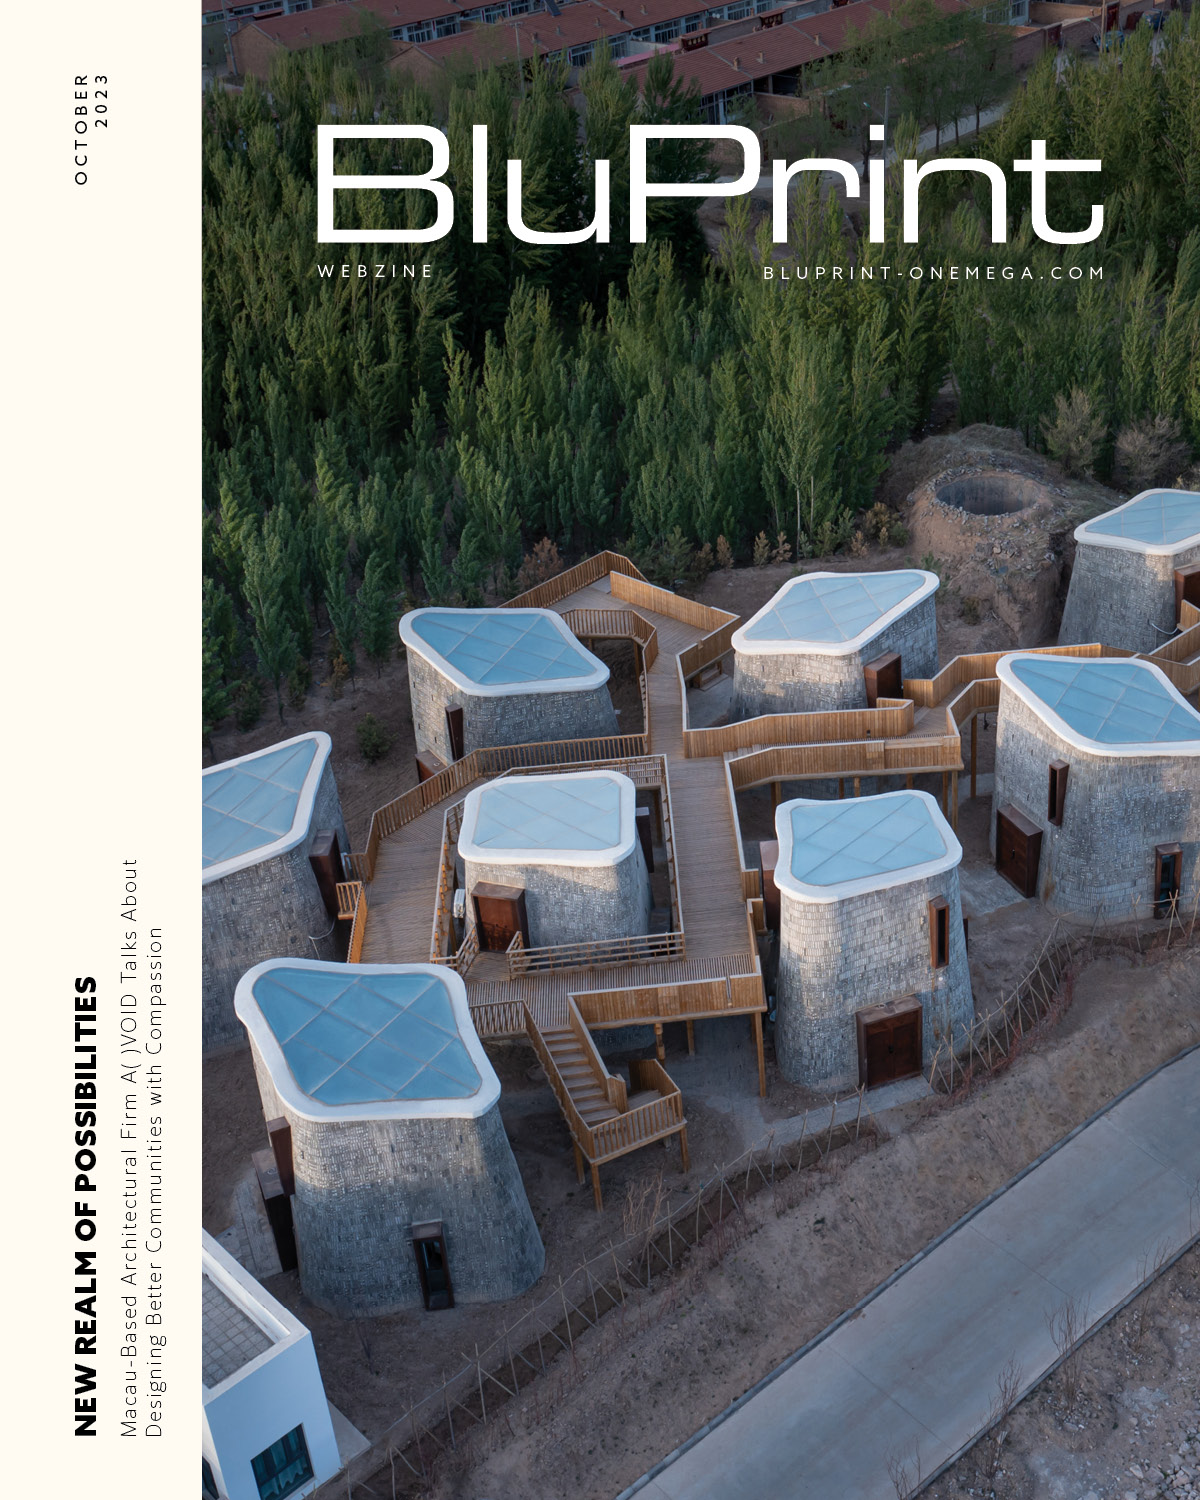 The Grotto Retreat at Xiyaotou graces the cover of BluPrint Webzine